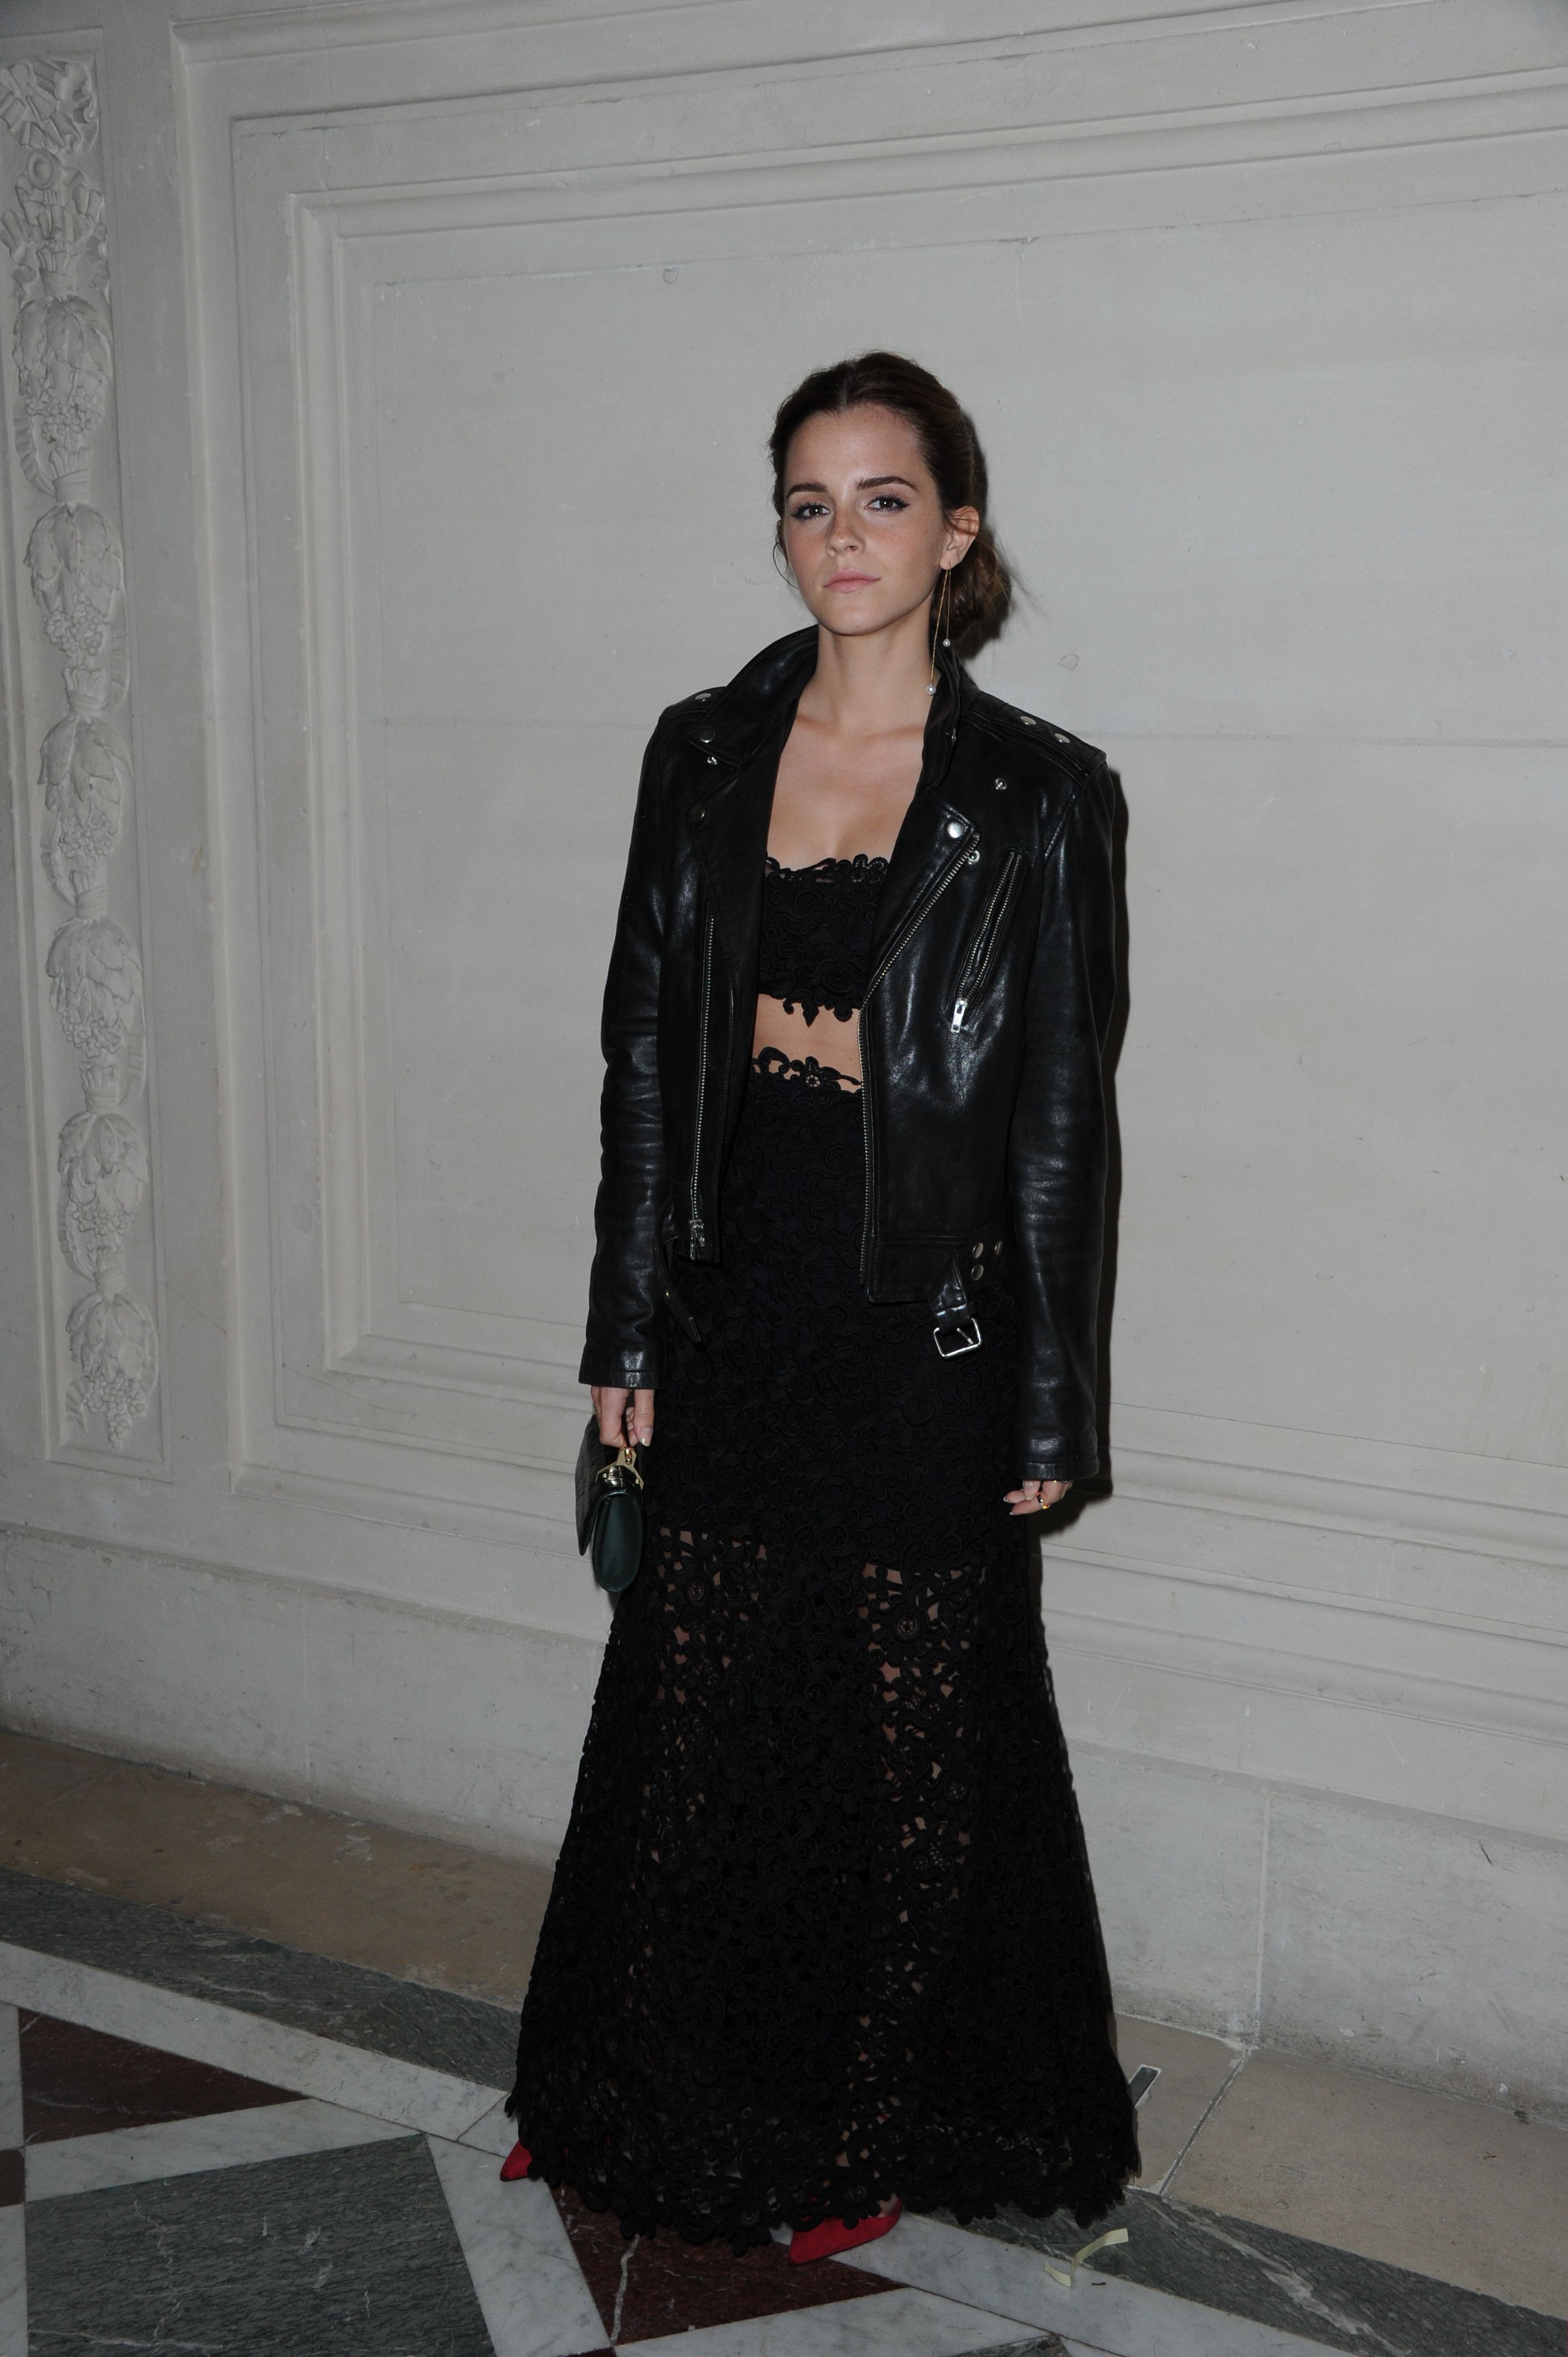 Paris Fashion Week - Valentino - Front Row and Arrivals